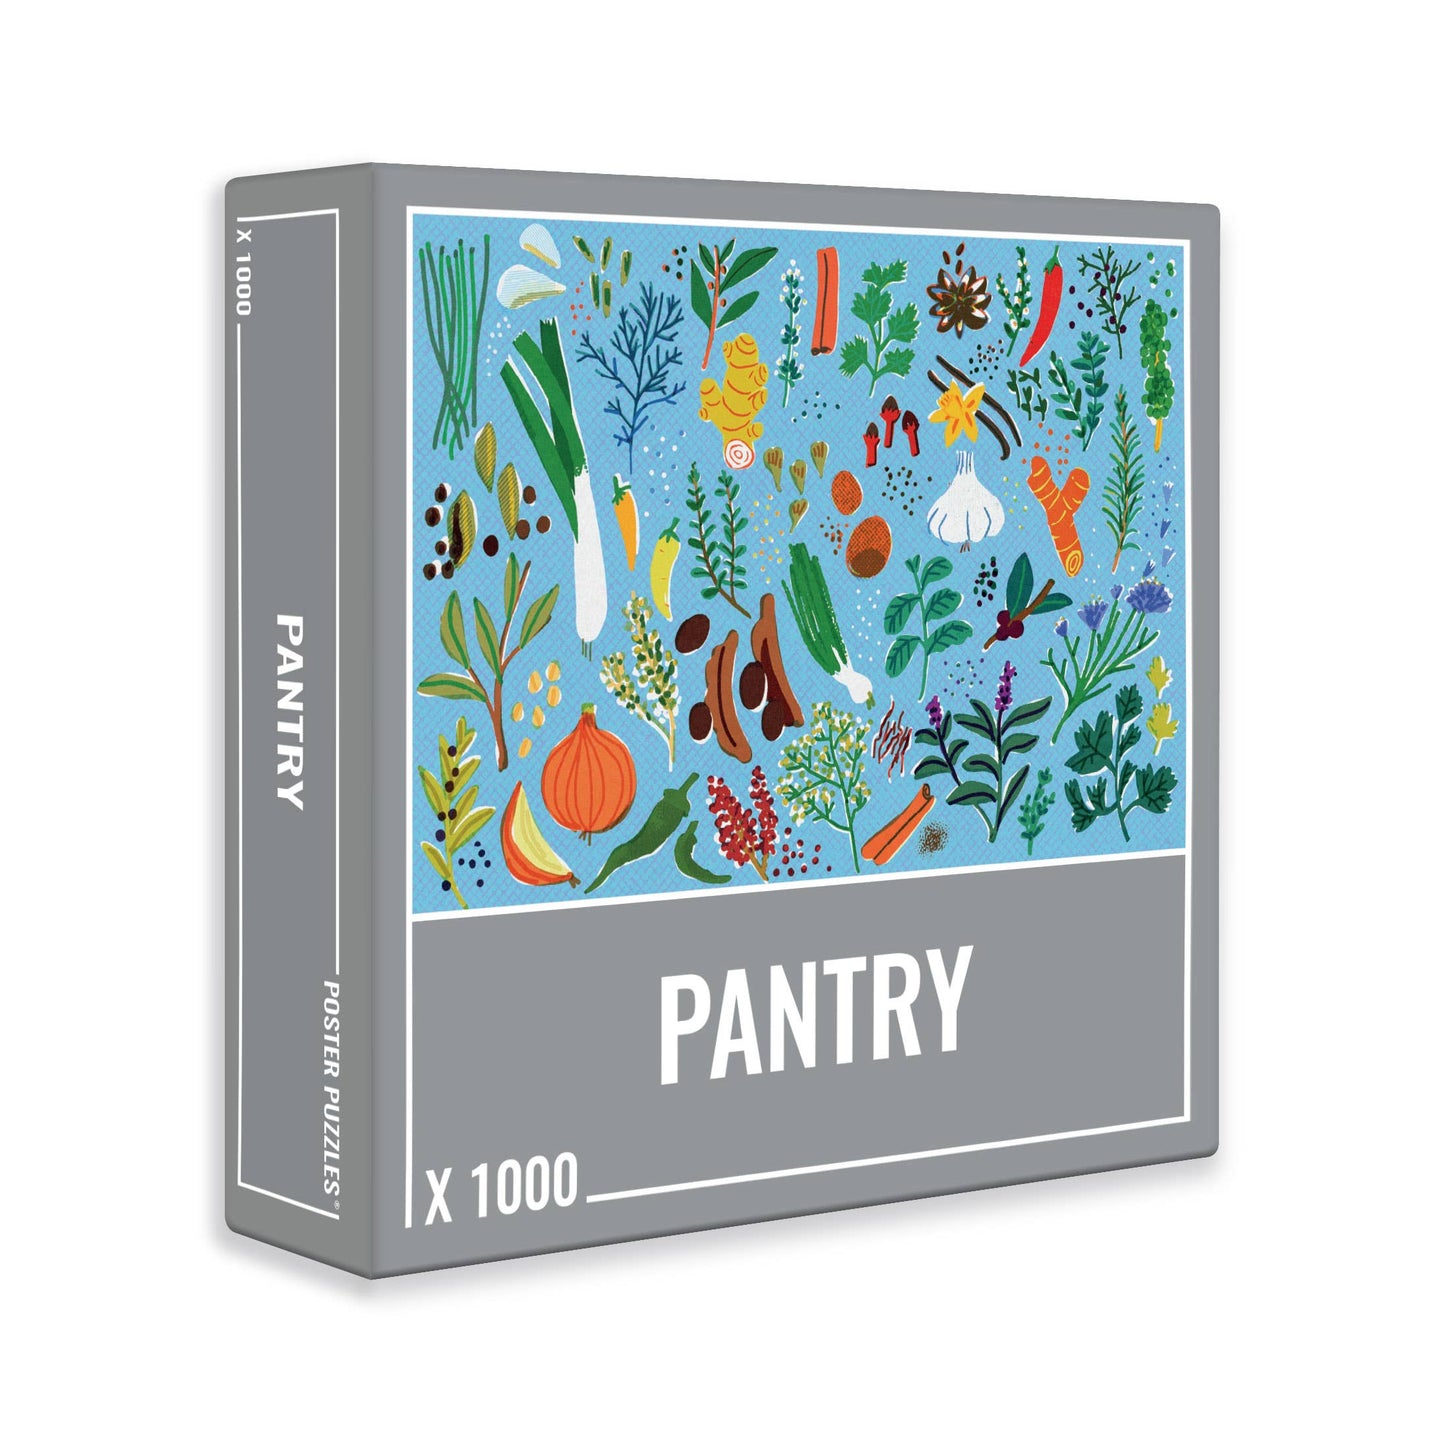 Cloudberries - Pantry - 1000 Piece Jigsaw Puzzle